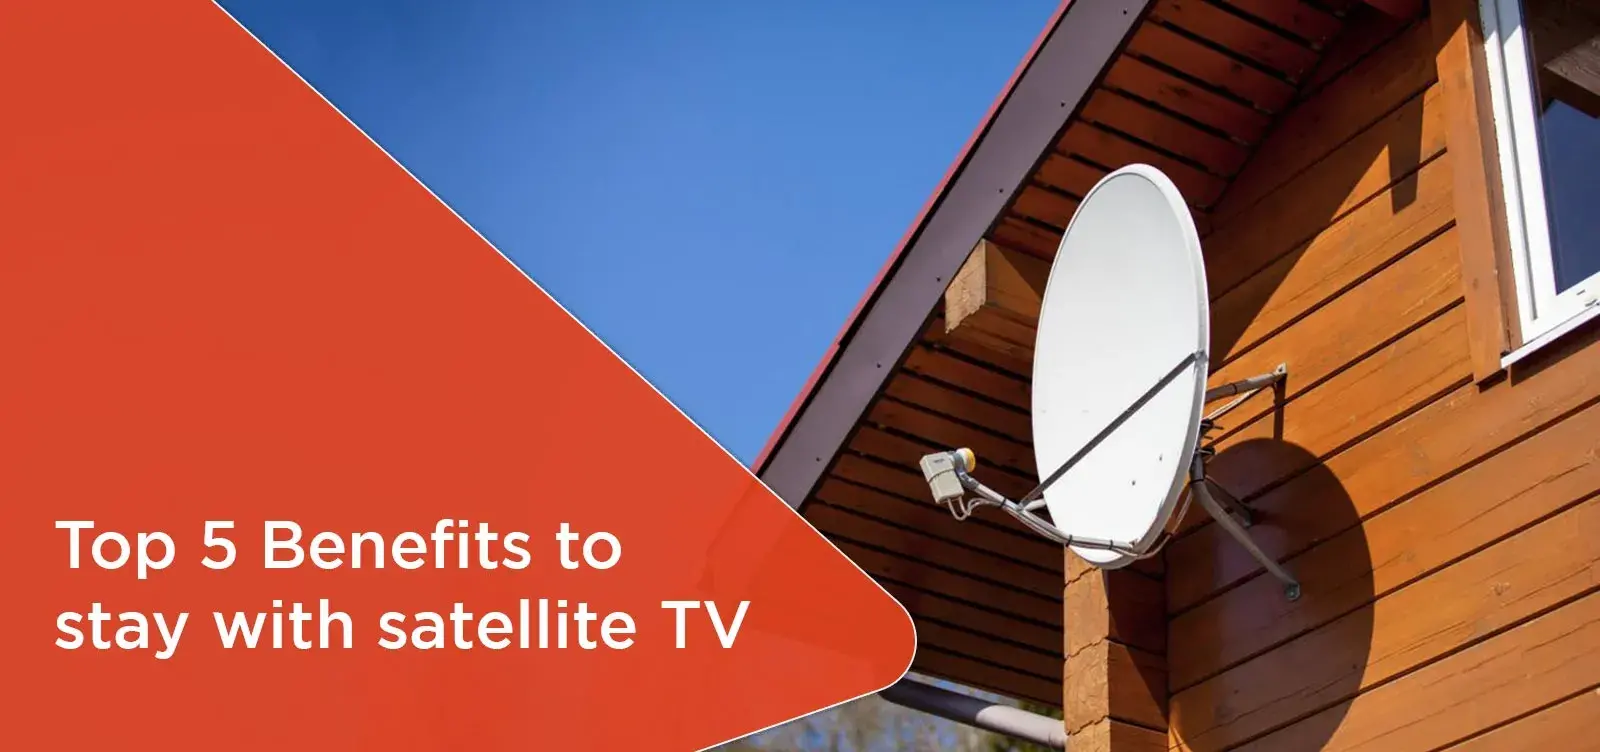 Top 5 Benefits to stay with satellite TV